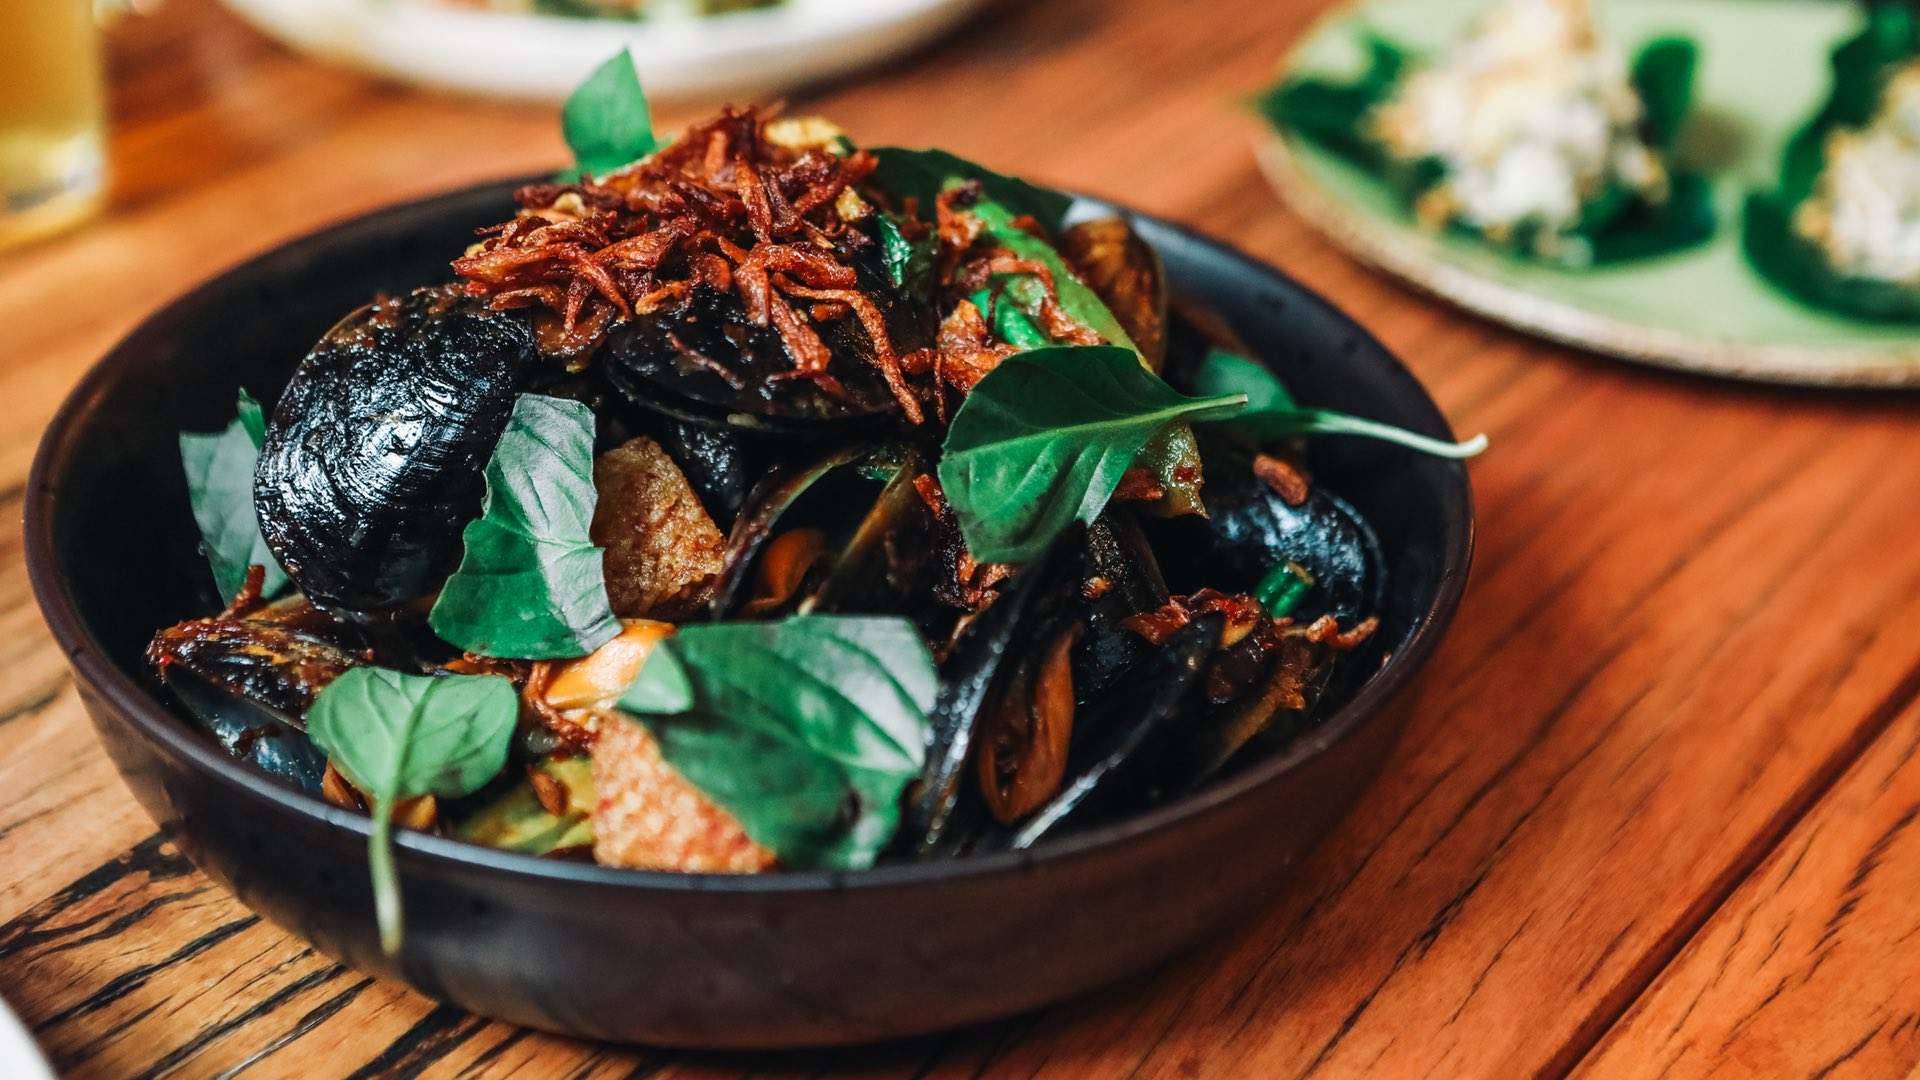 A Look Inside Chin Chin's Highly Anticipated New Sydney Restaurant